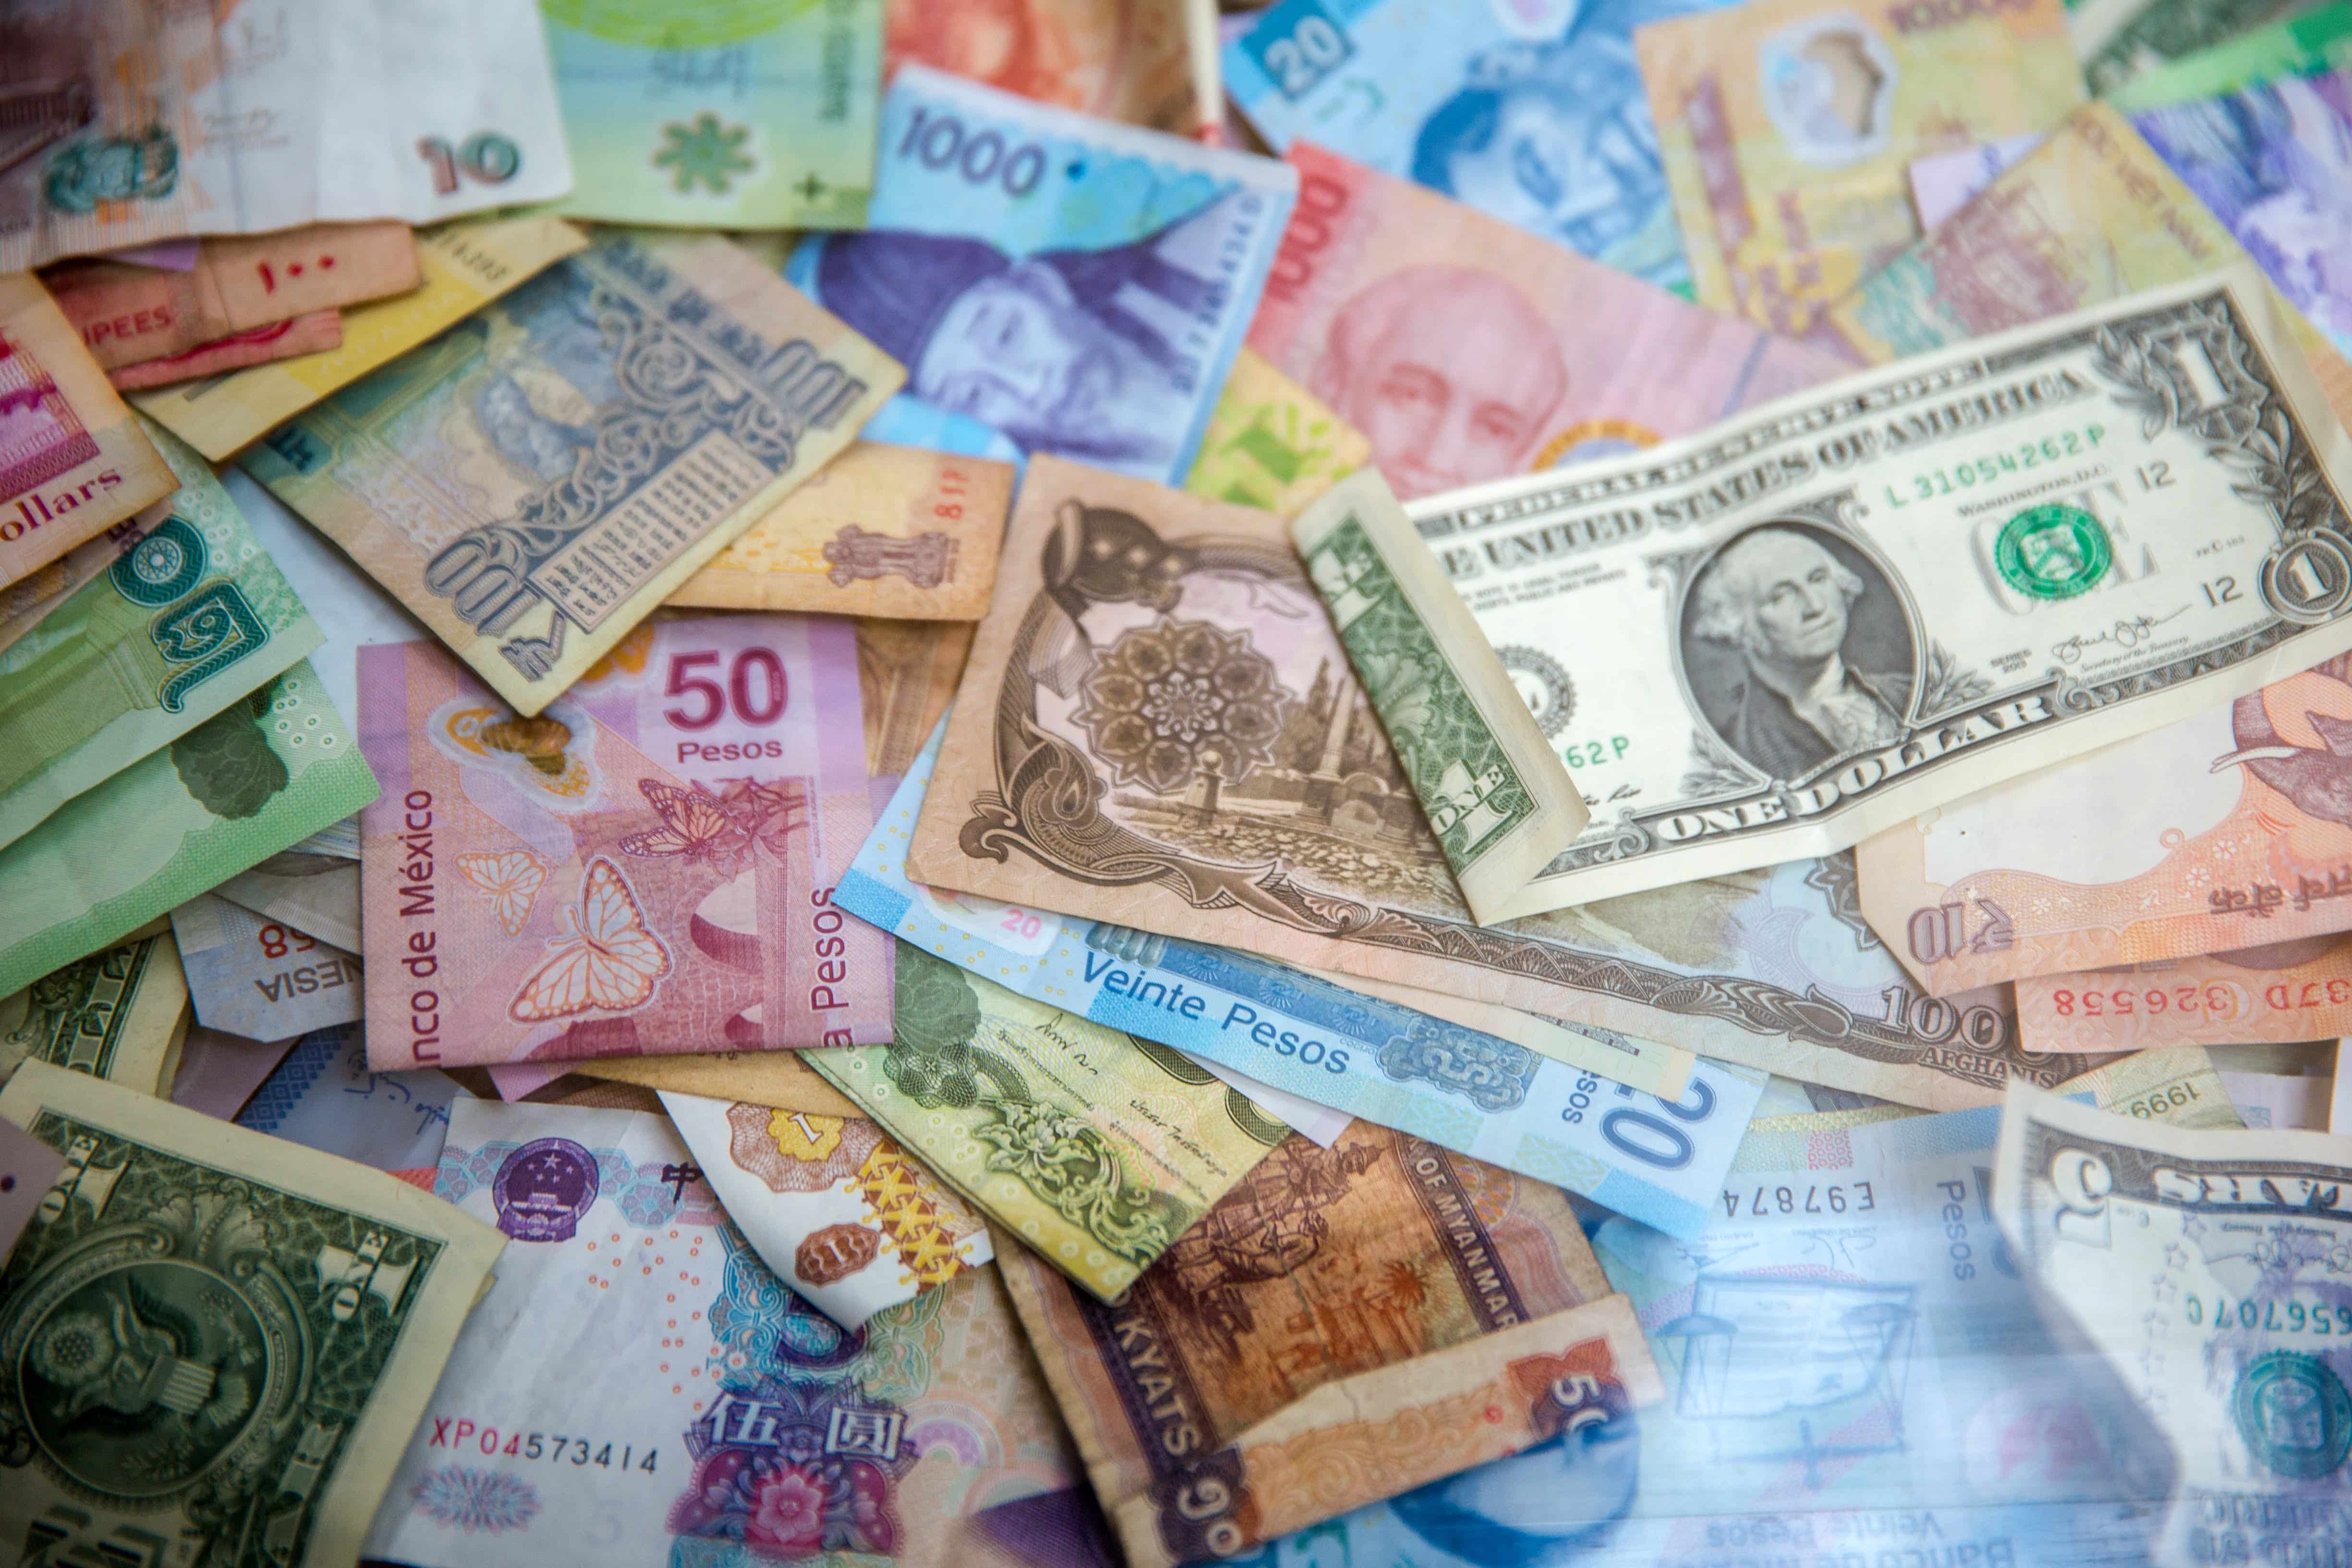 Many different currencies